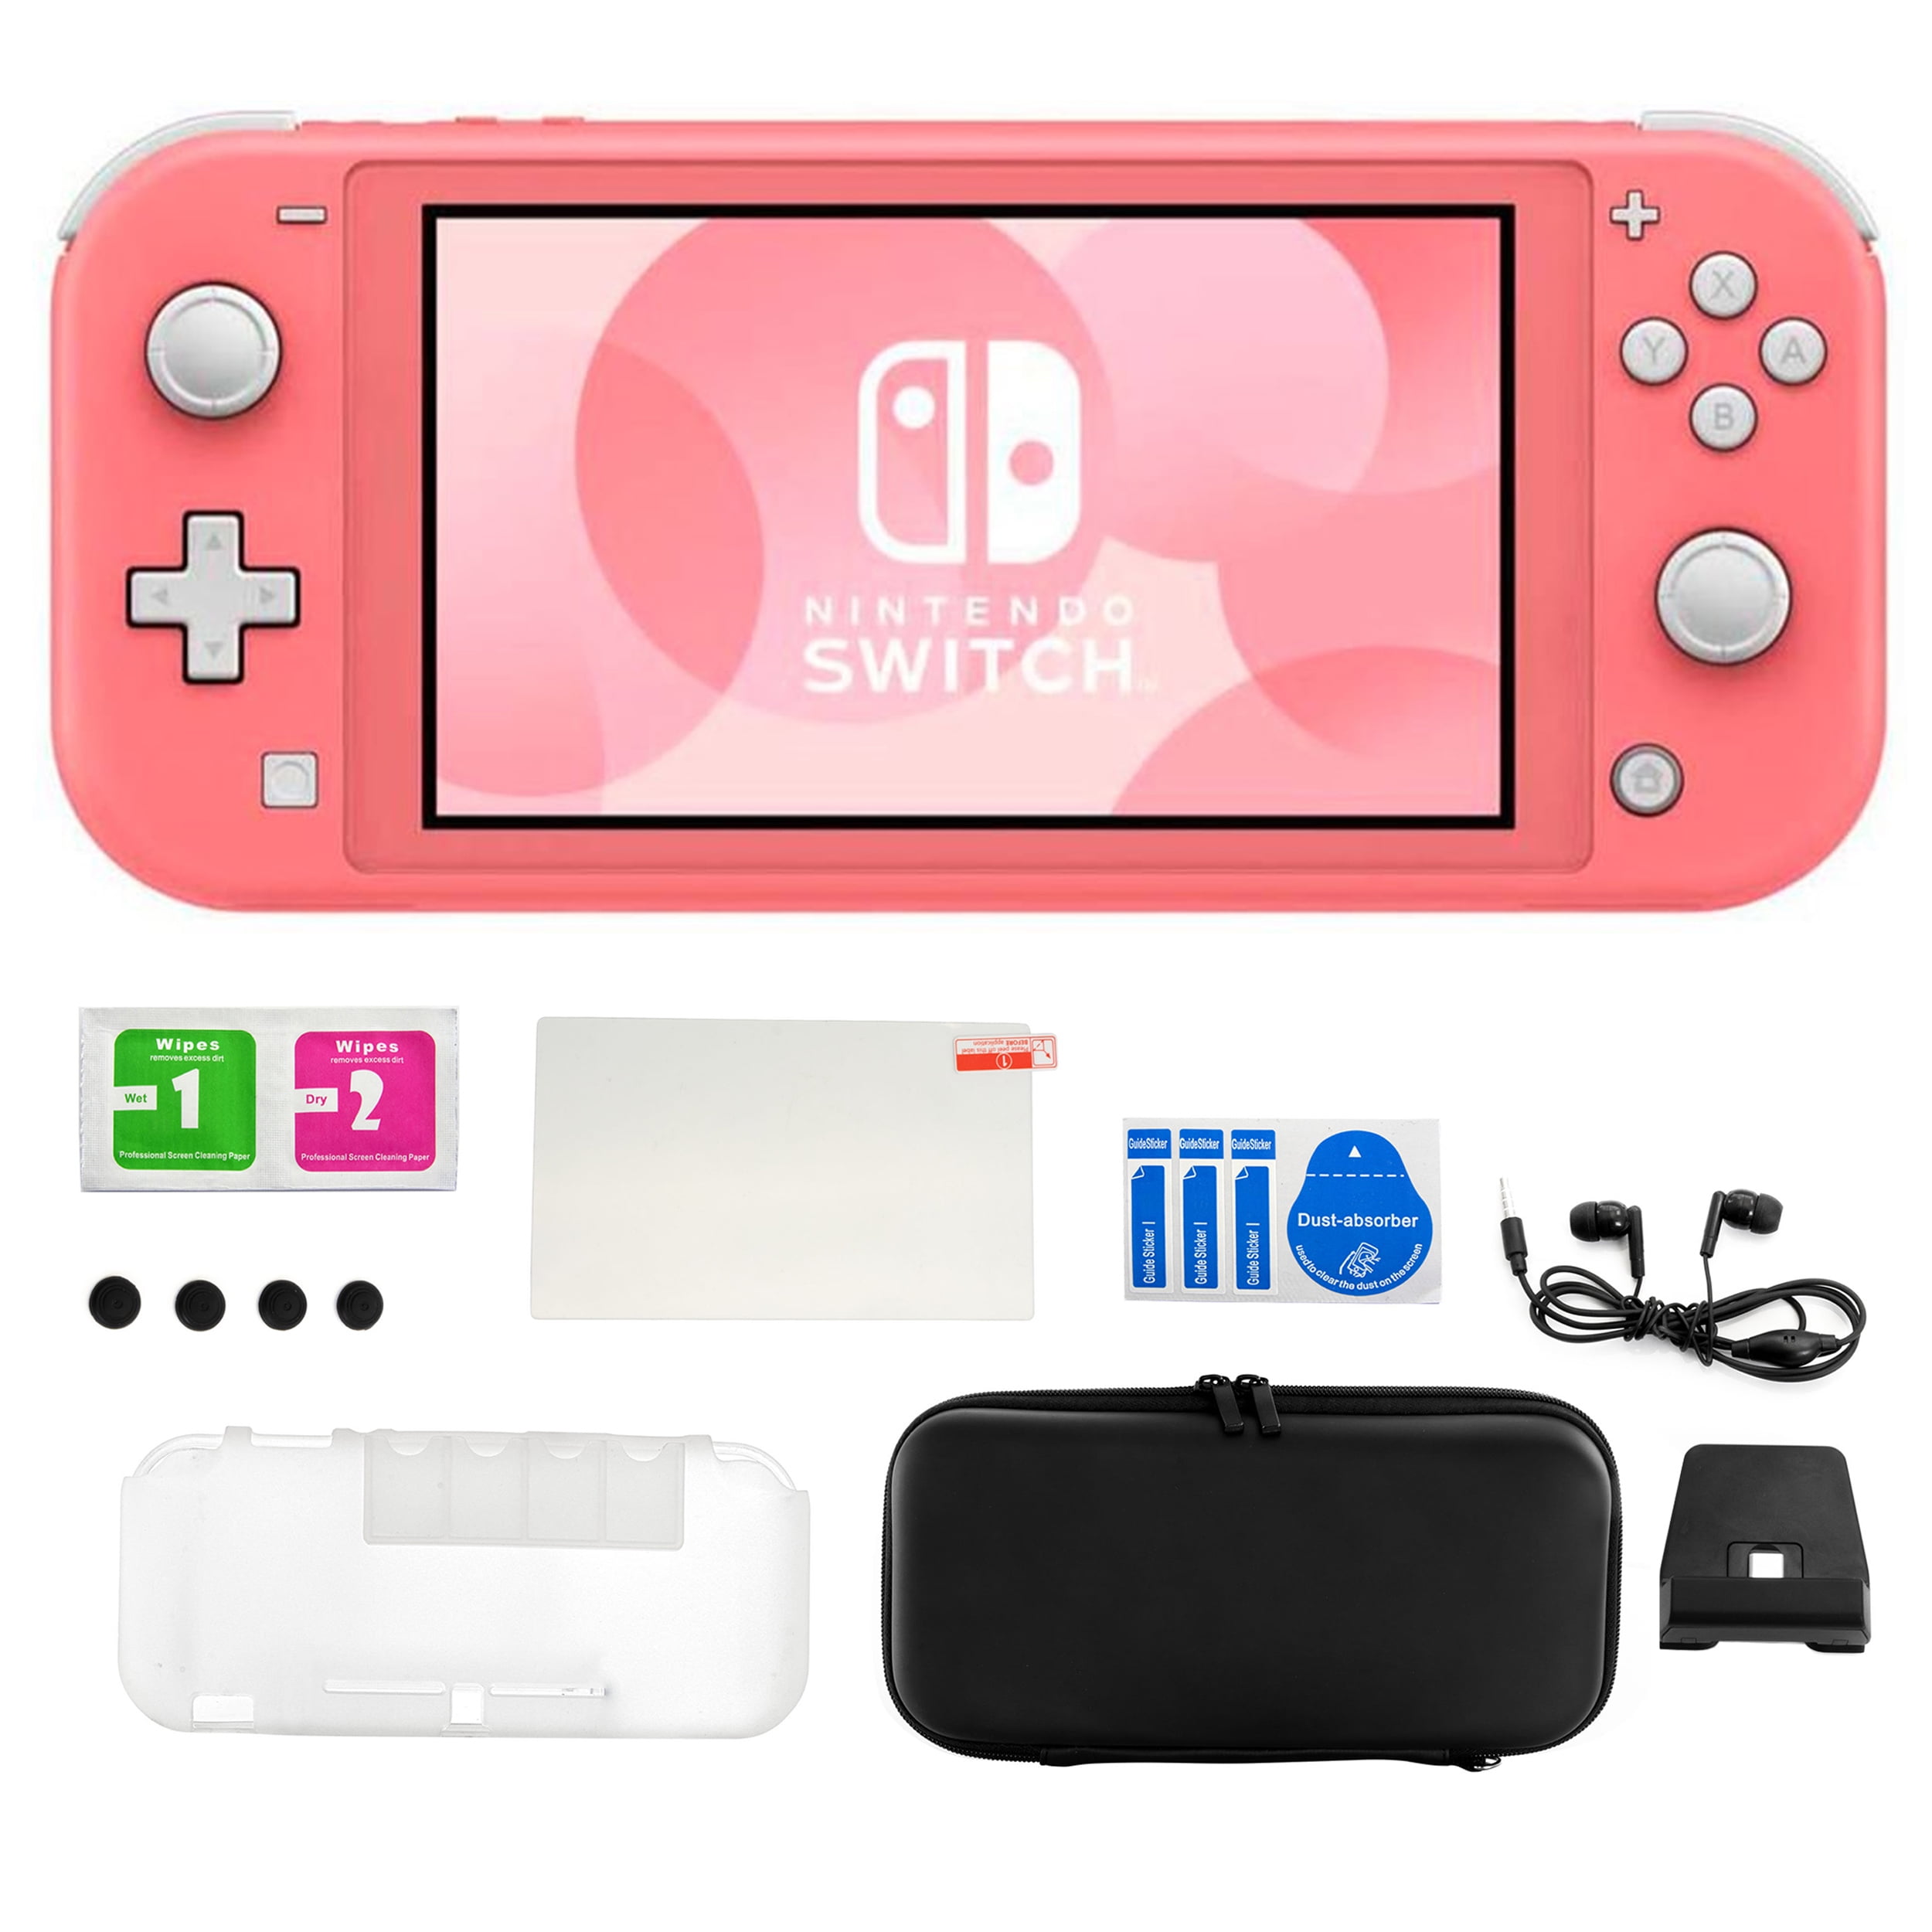 Nintendo Switch Lite in Coral with Accessory Kit